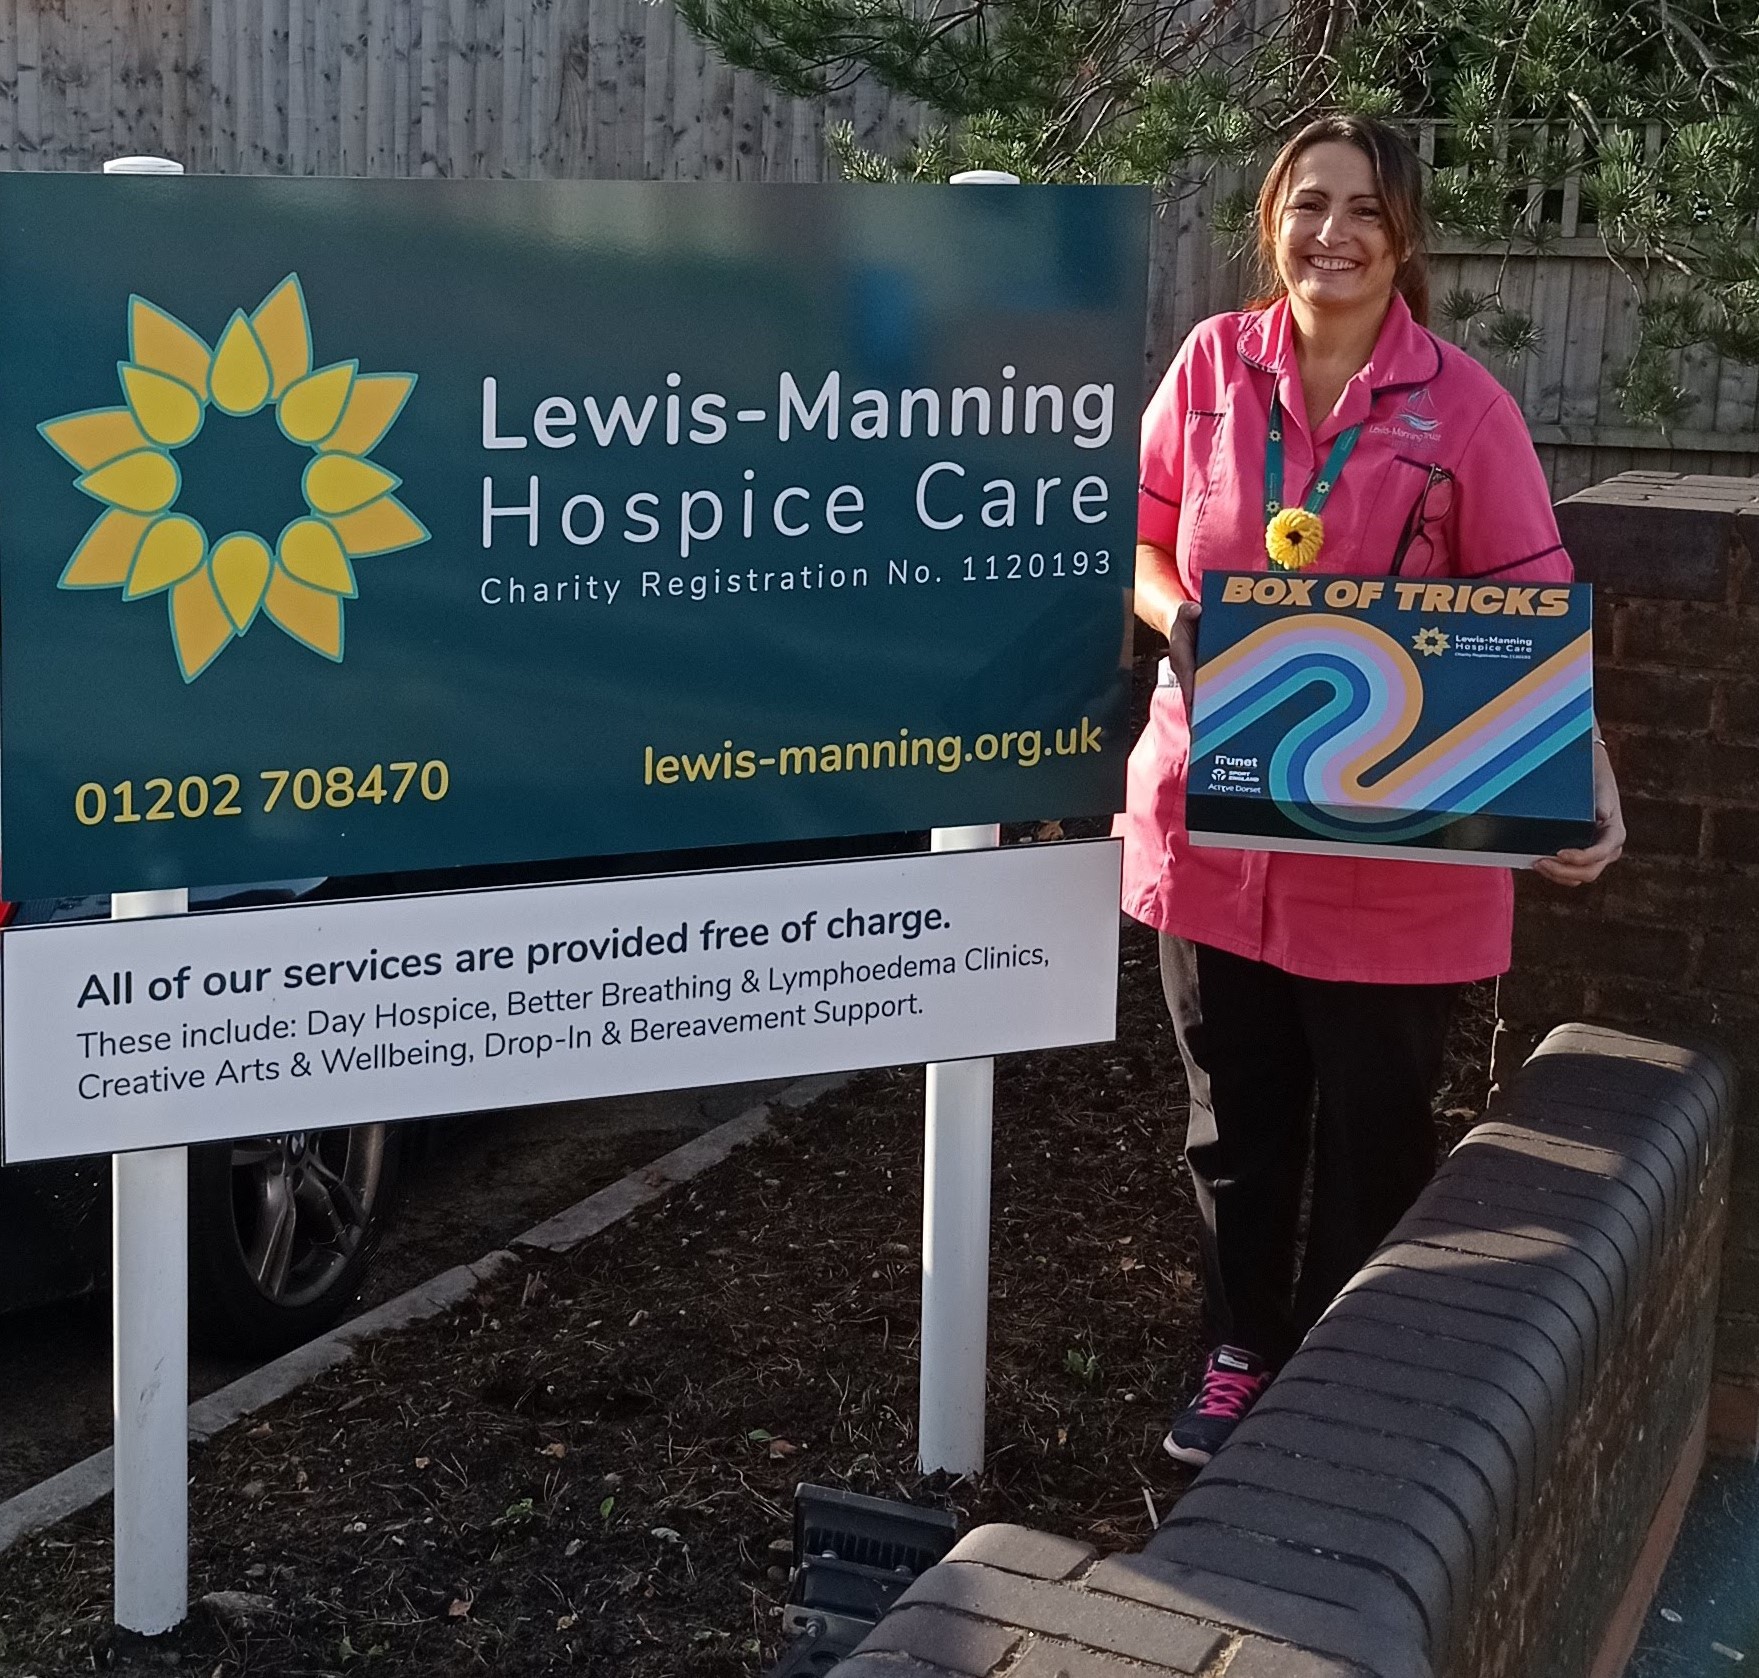 ‘Box of Tricks’ brings joy, inspiration and increased mobility to Lewis-Manning Hospice Care patients!